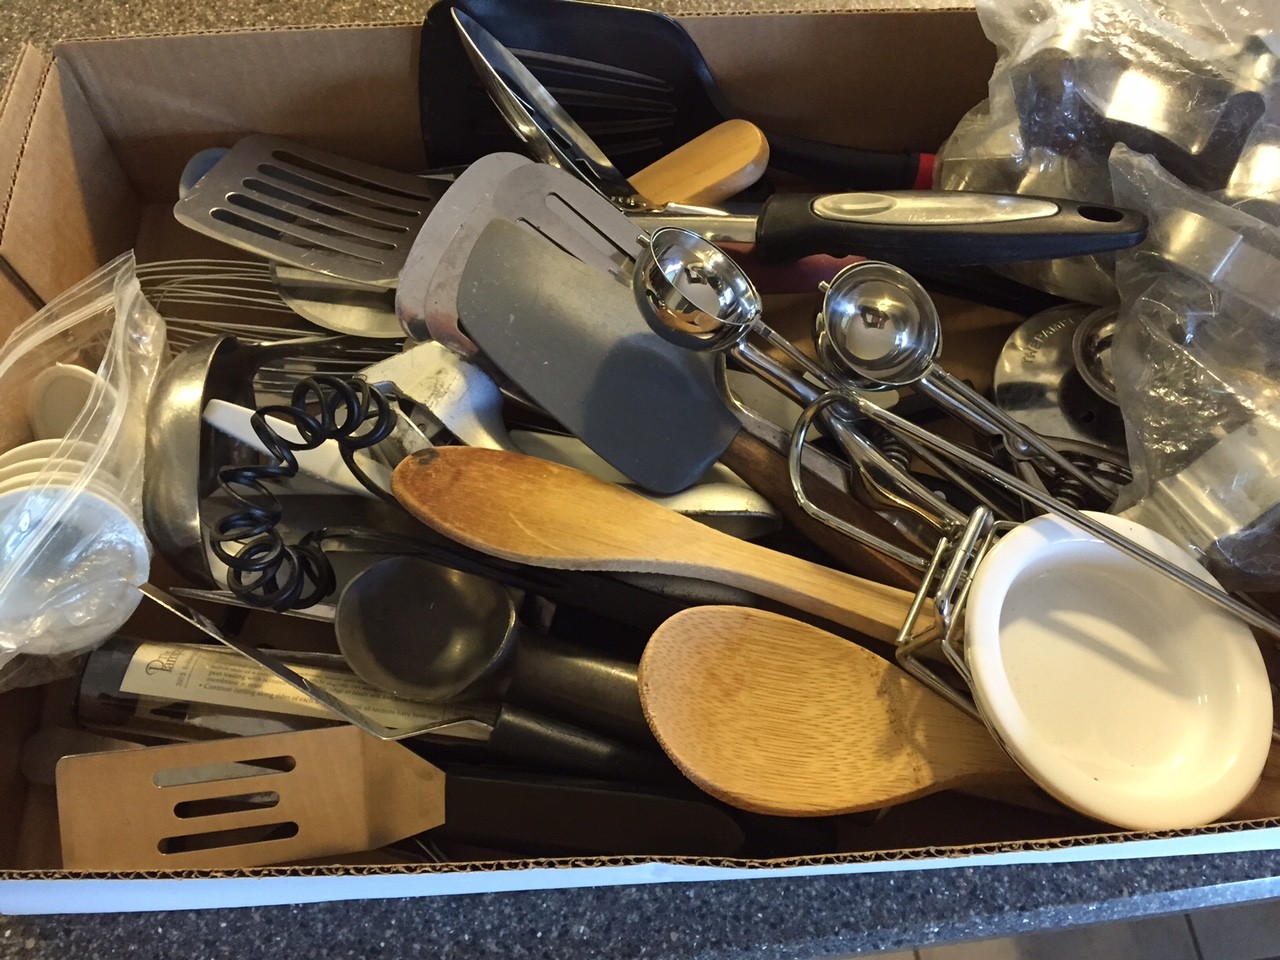 The extra kitchen utensils found as we cleaned out the cupboards